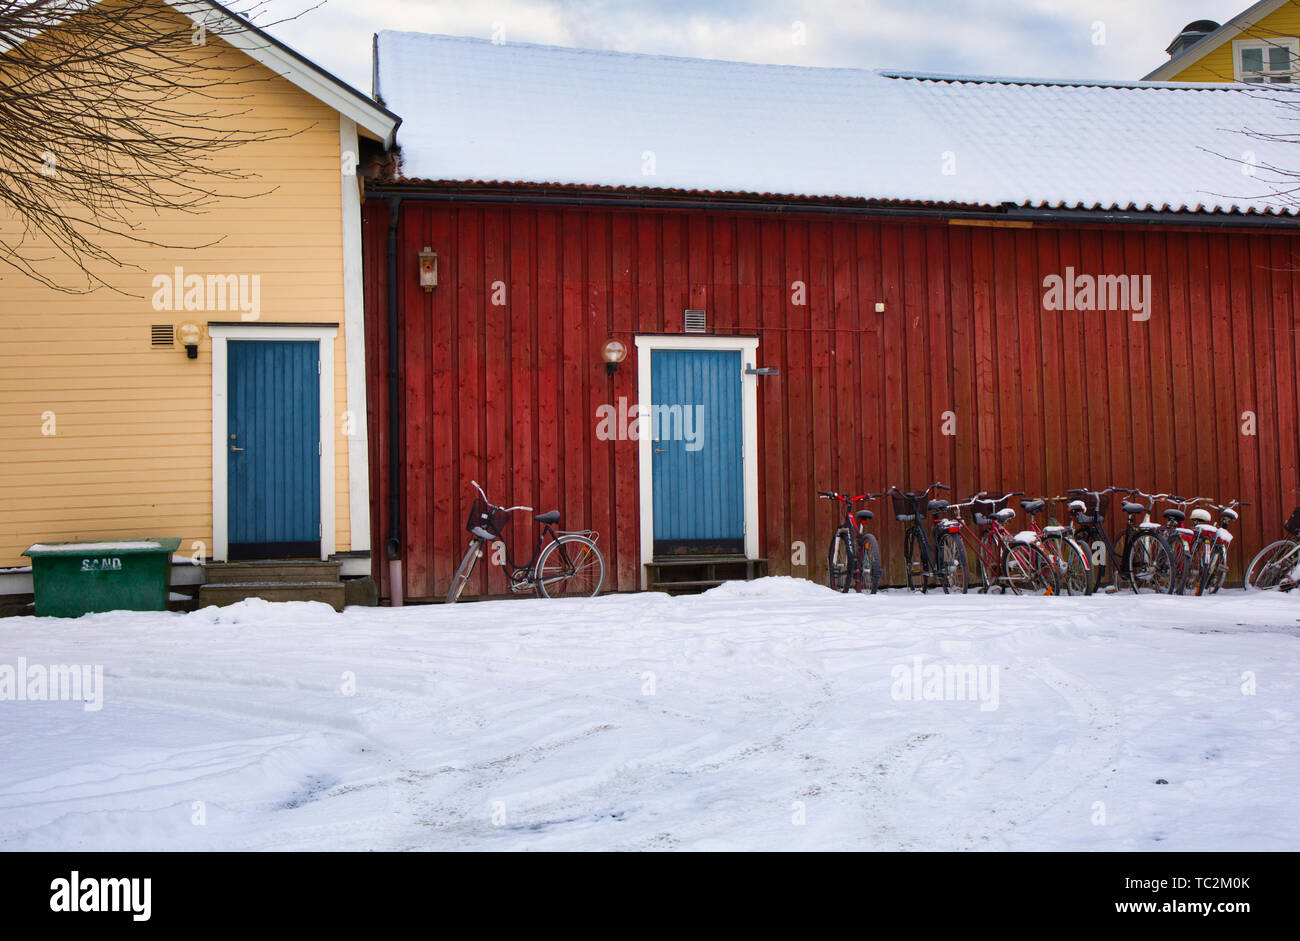 Bikes outside traditional timber buildings in winter, Sweden, Scandinavia Stock Photo